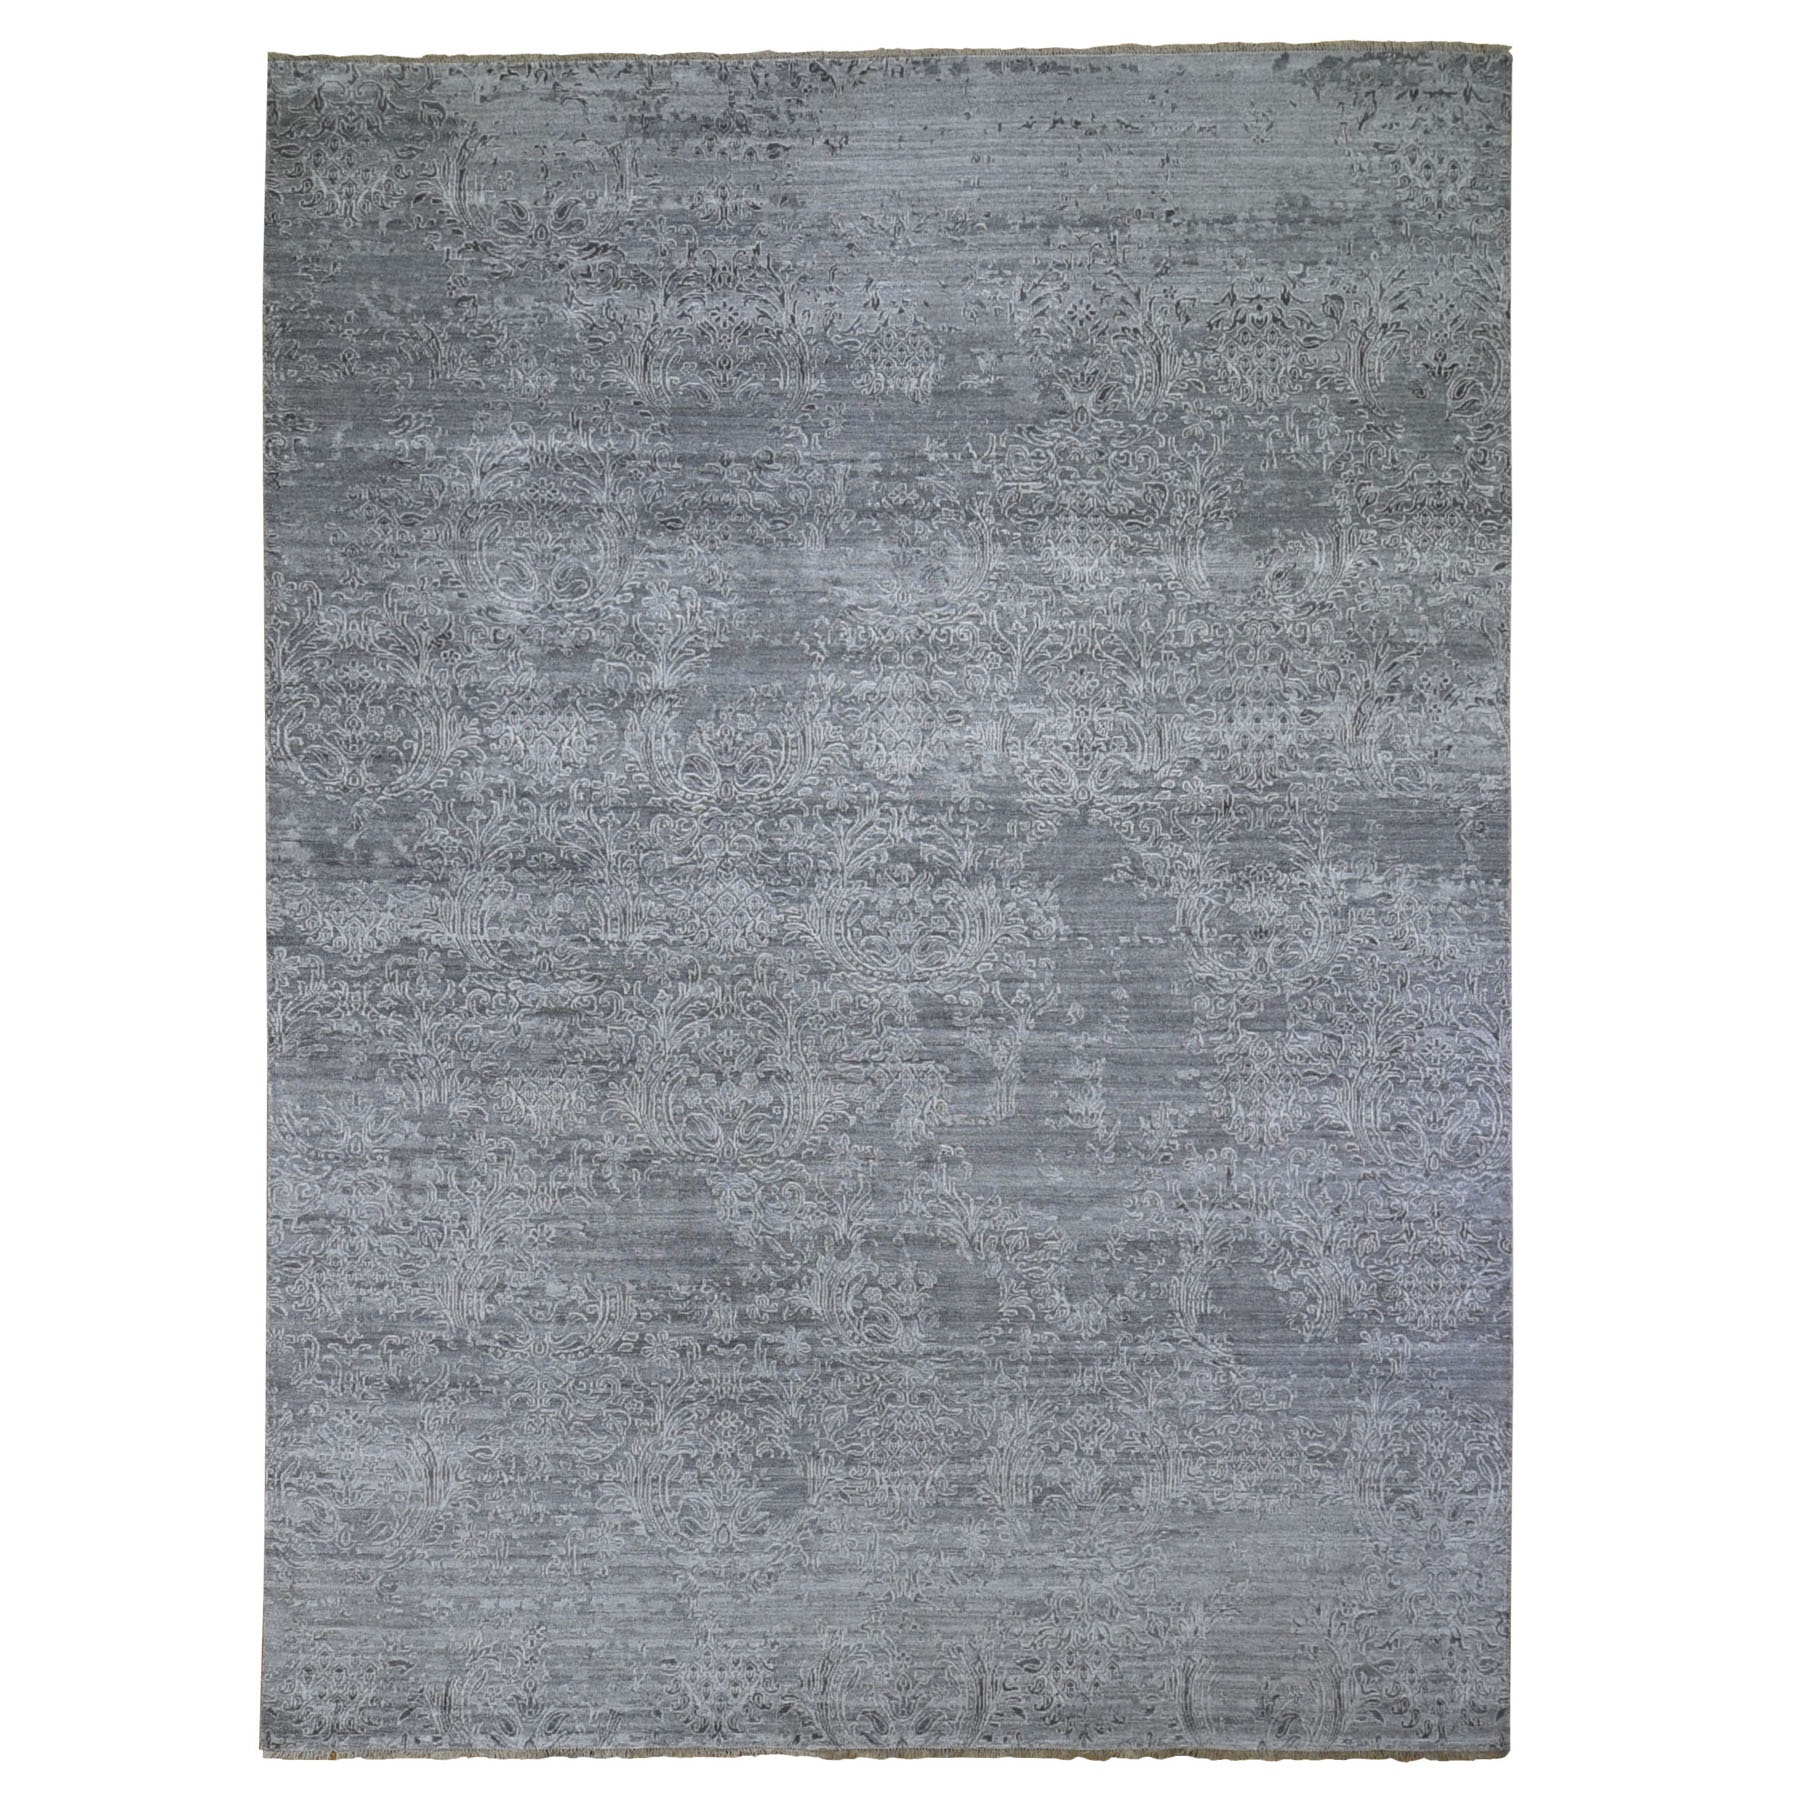 9'X12' Gray Damask Tone On Tone Wool And Silk Hand Knotted Oriental Rug moad9c6b